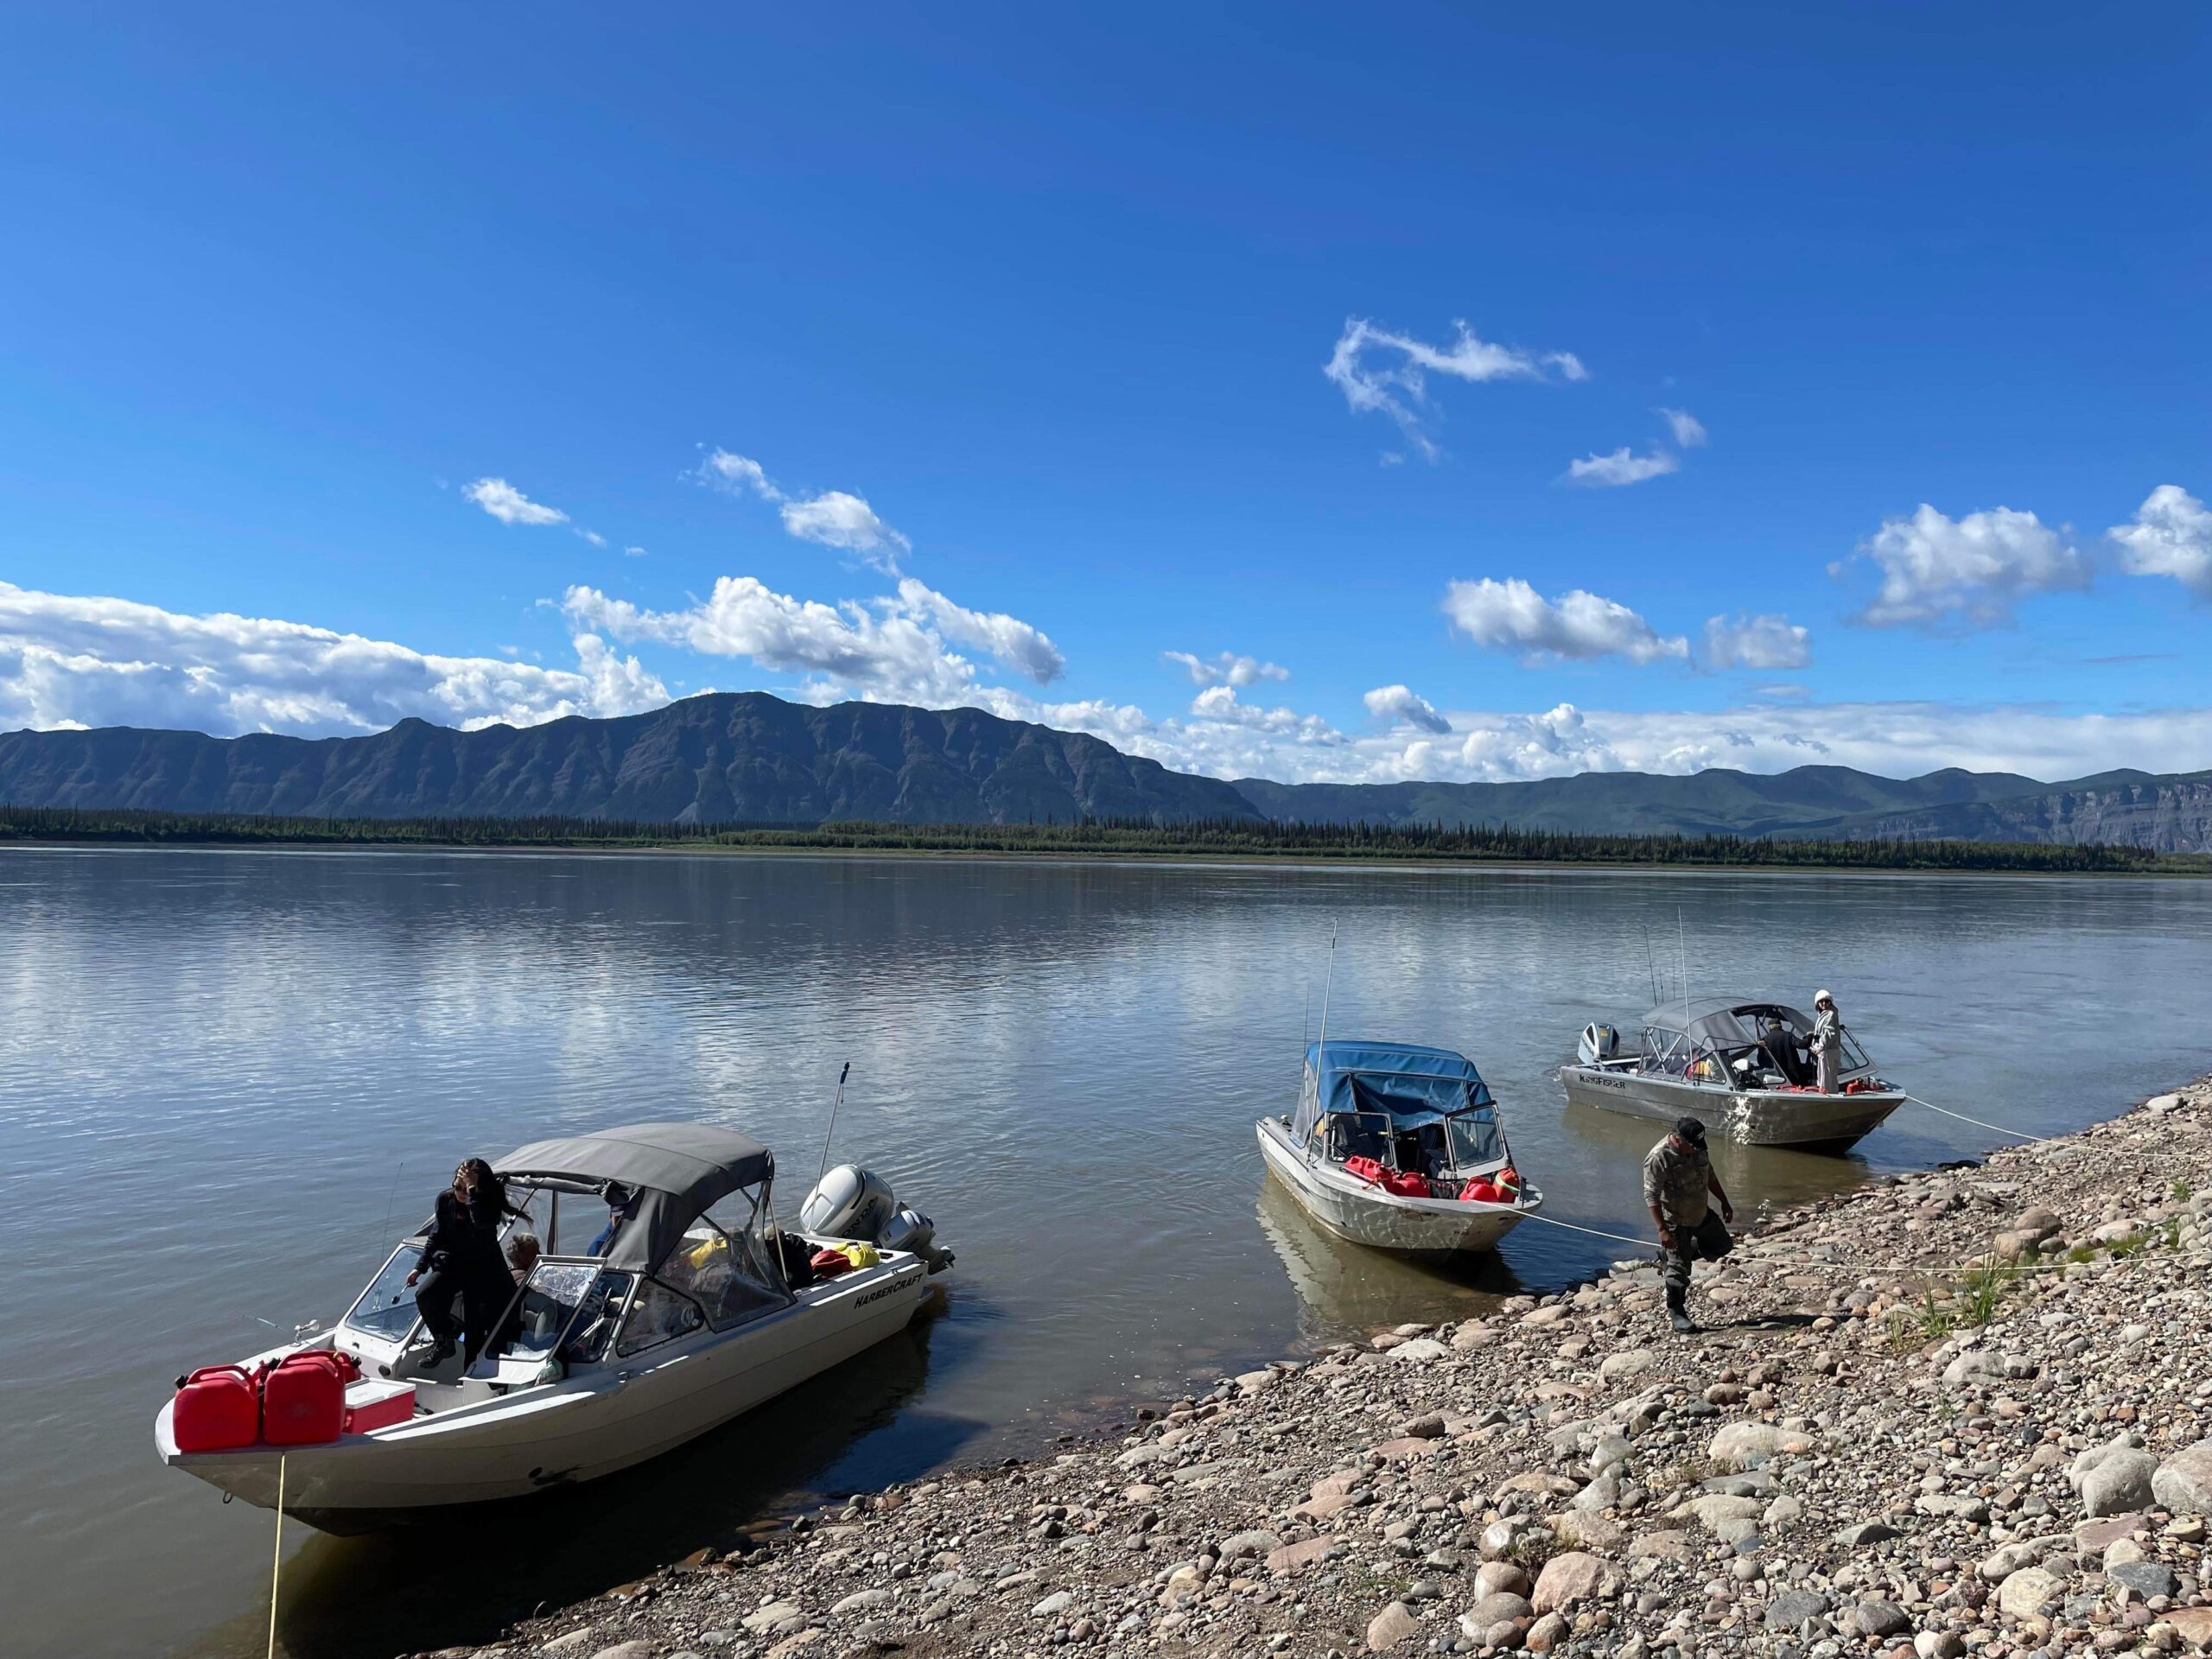 Guests enjoy the spectacular view of the North Nahanni River on their Mackenzie Arctic Expedition to the Arctic Ocean with North Star Adventures